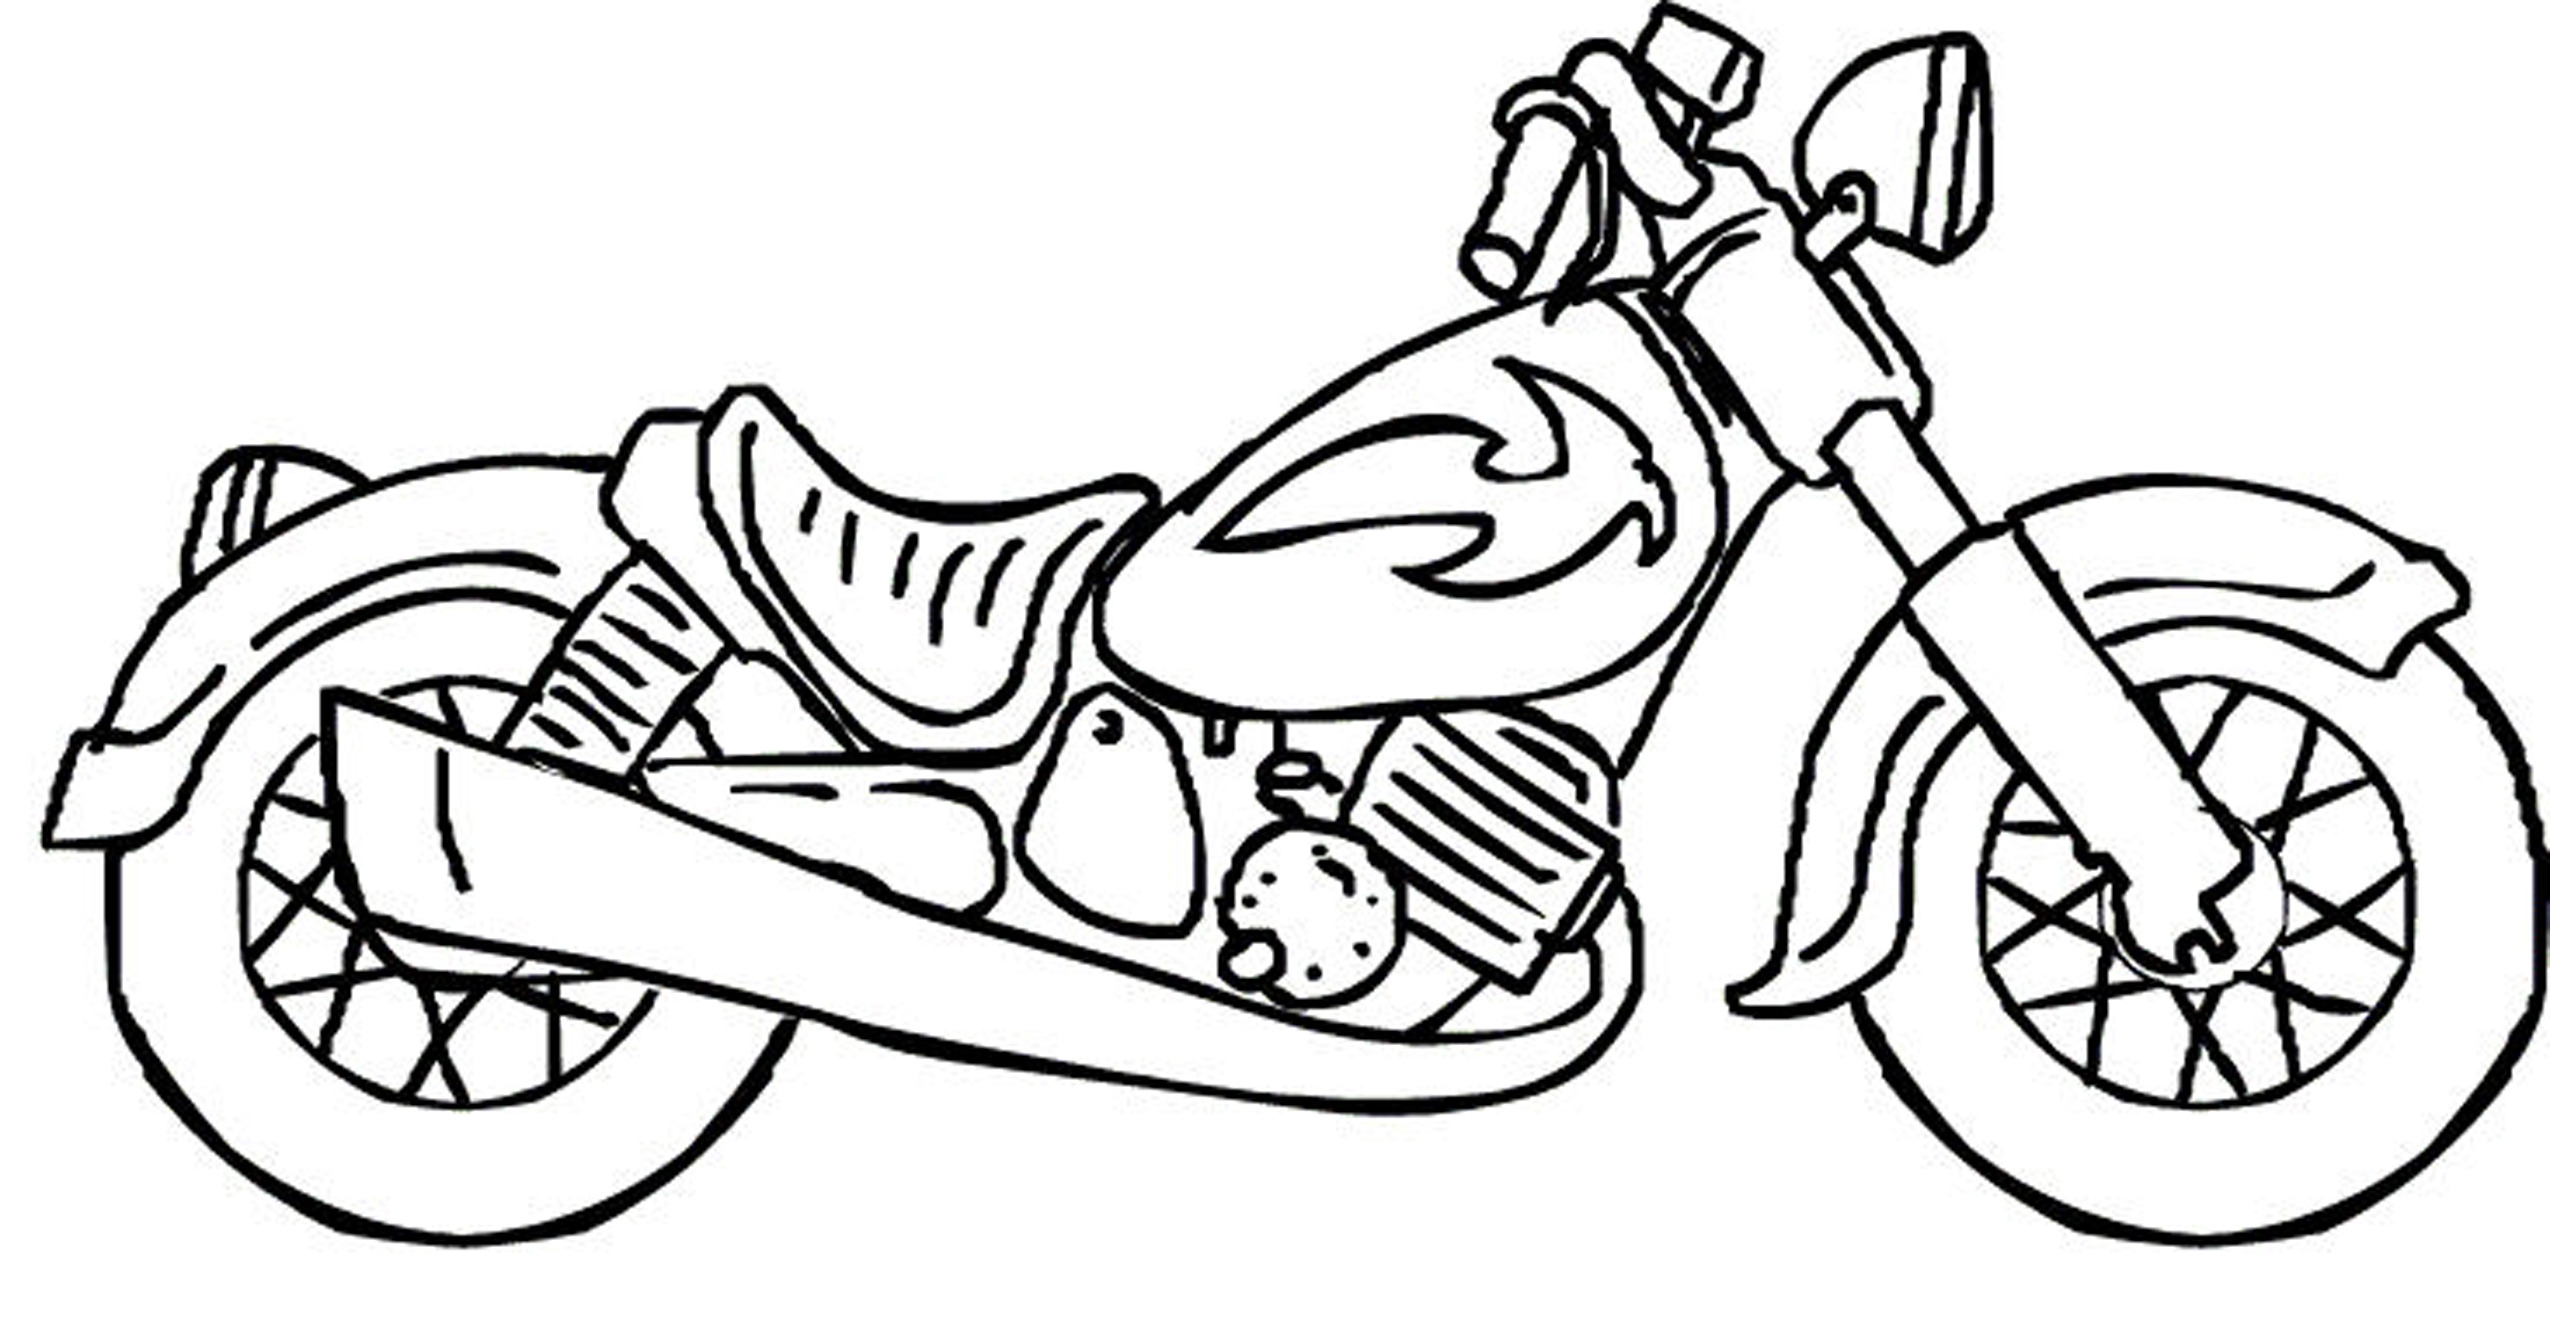 Motorcycle Coloring Pages - Whataboutmimi.com